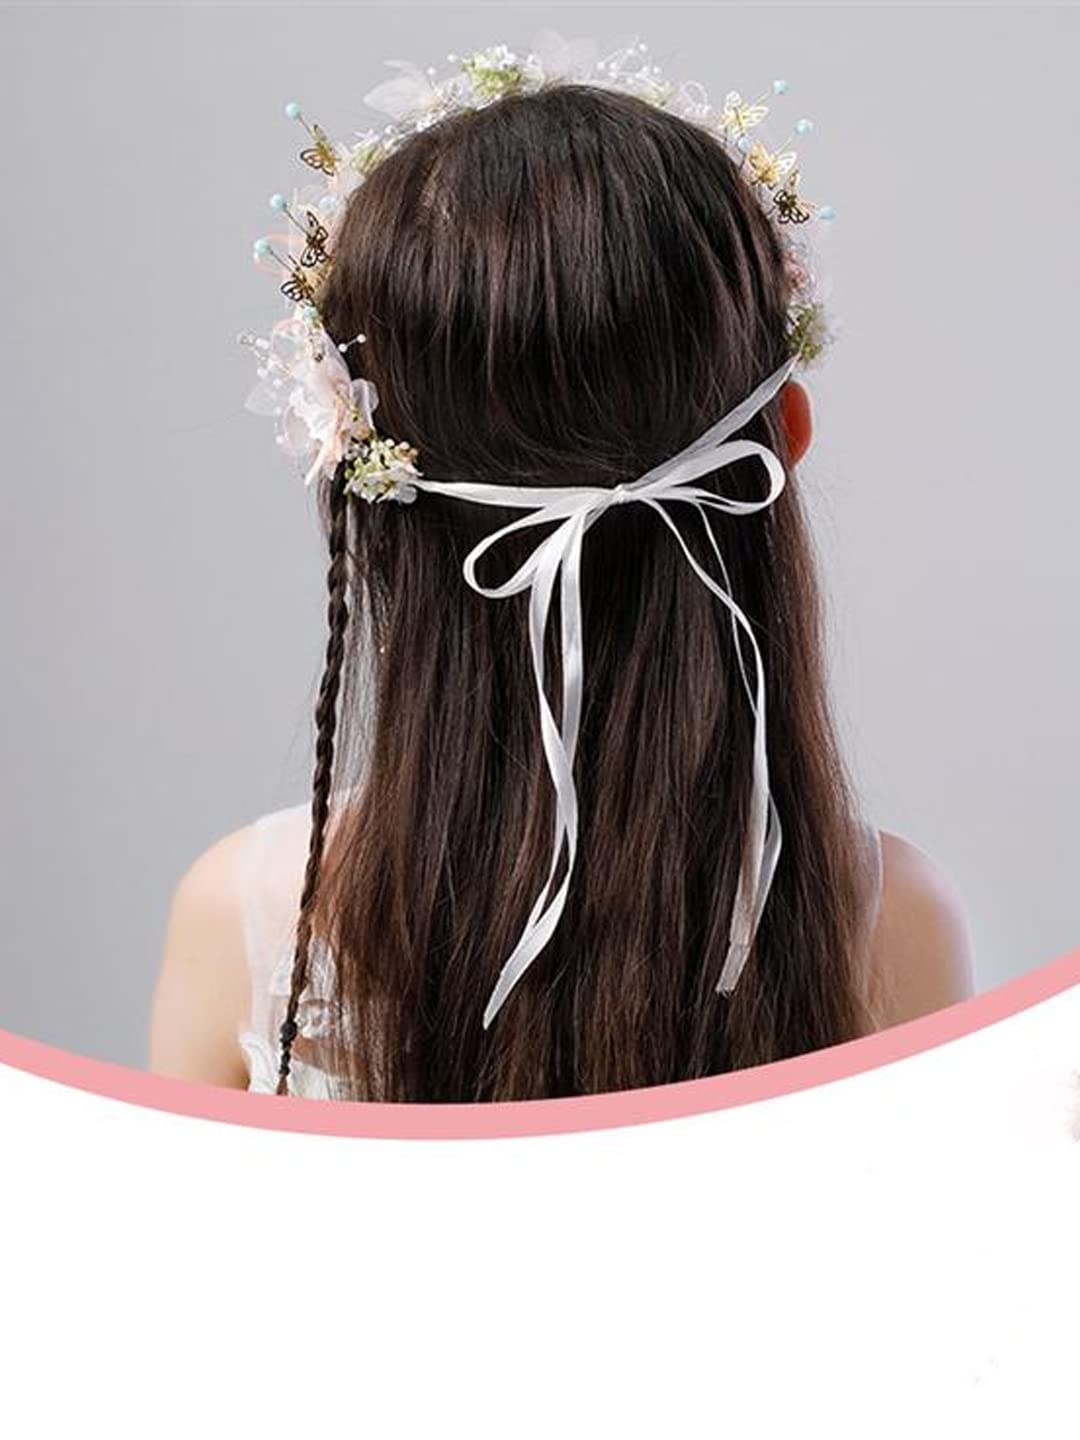 Yellow Chimes Tiara for Women and Girls Floral Hair Vine for Women White Bridal Hair Vine Tiara Headband Hair Accessories Wedding Jewellery for Girls and Women Bridal Hair Accessories for Wedding.